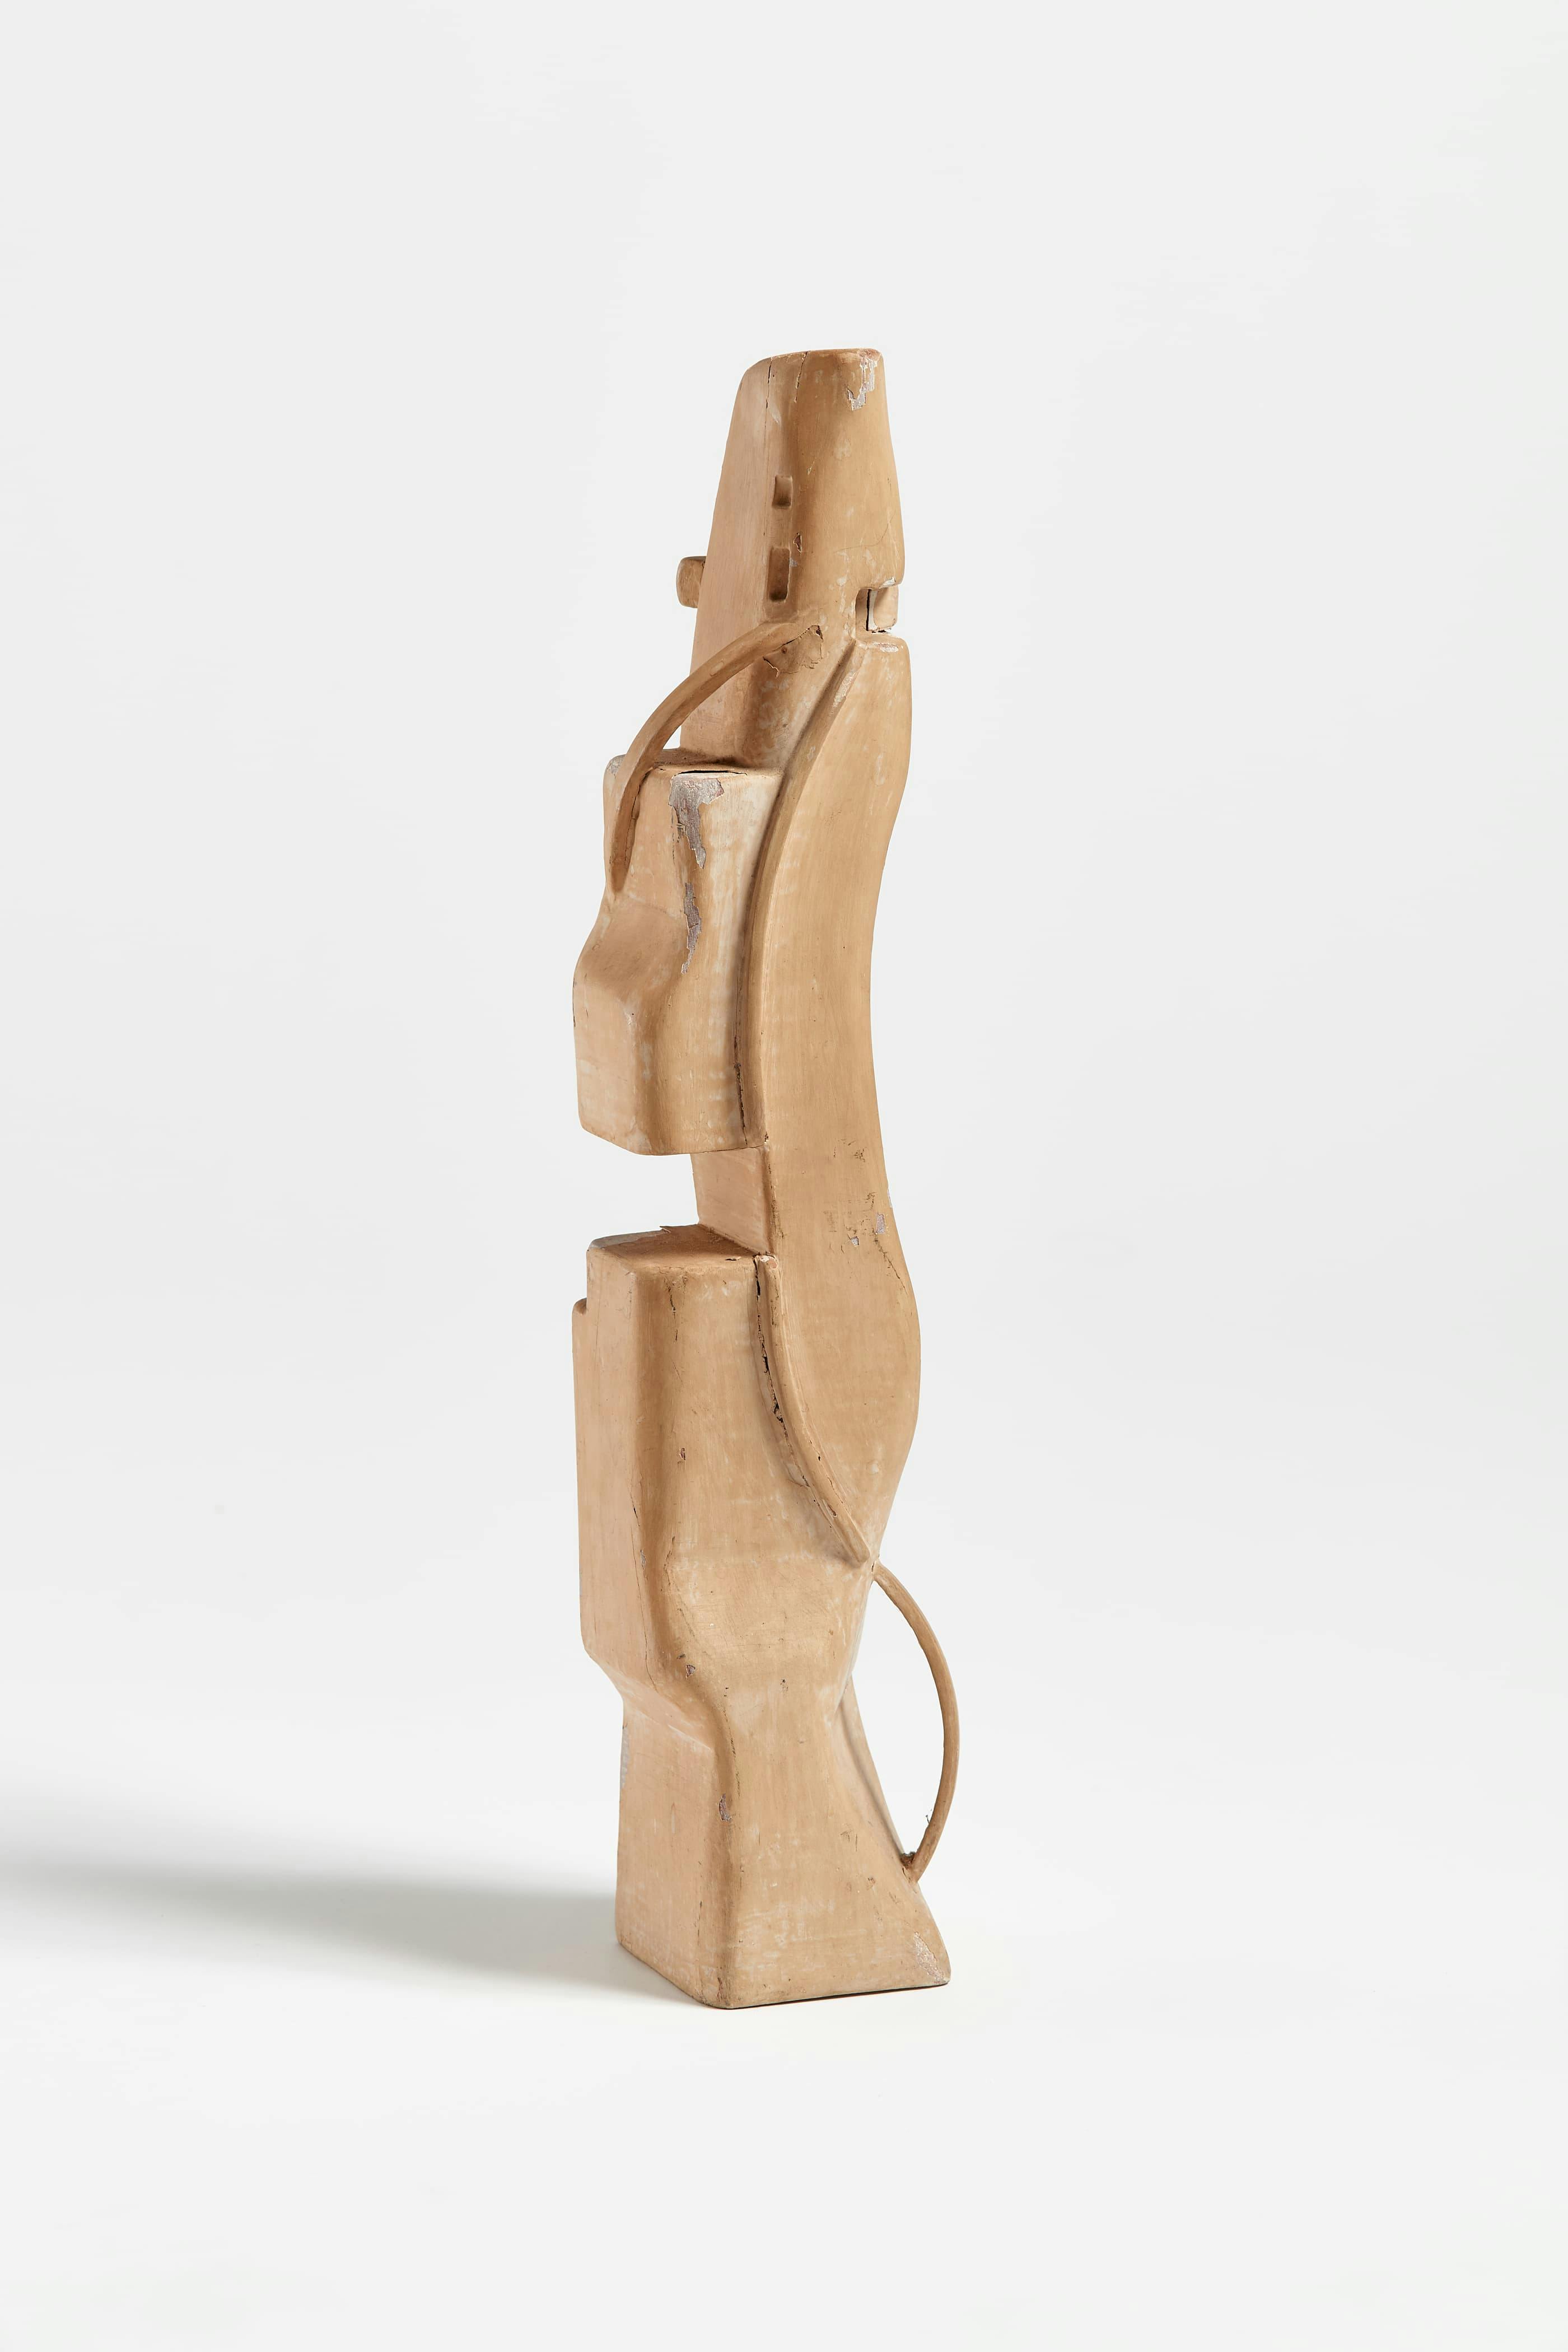 Image of abstract, free-standing sculpture by Gyula Kosice.